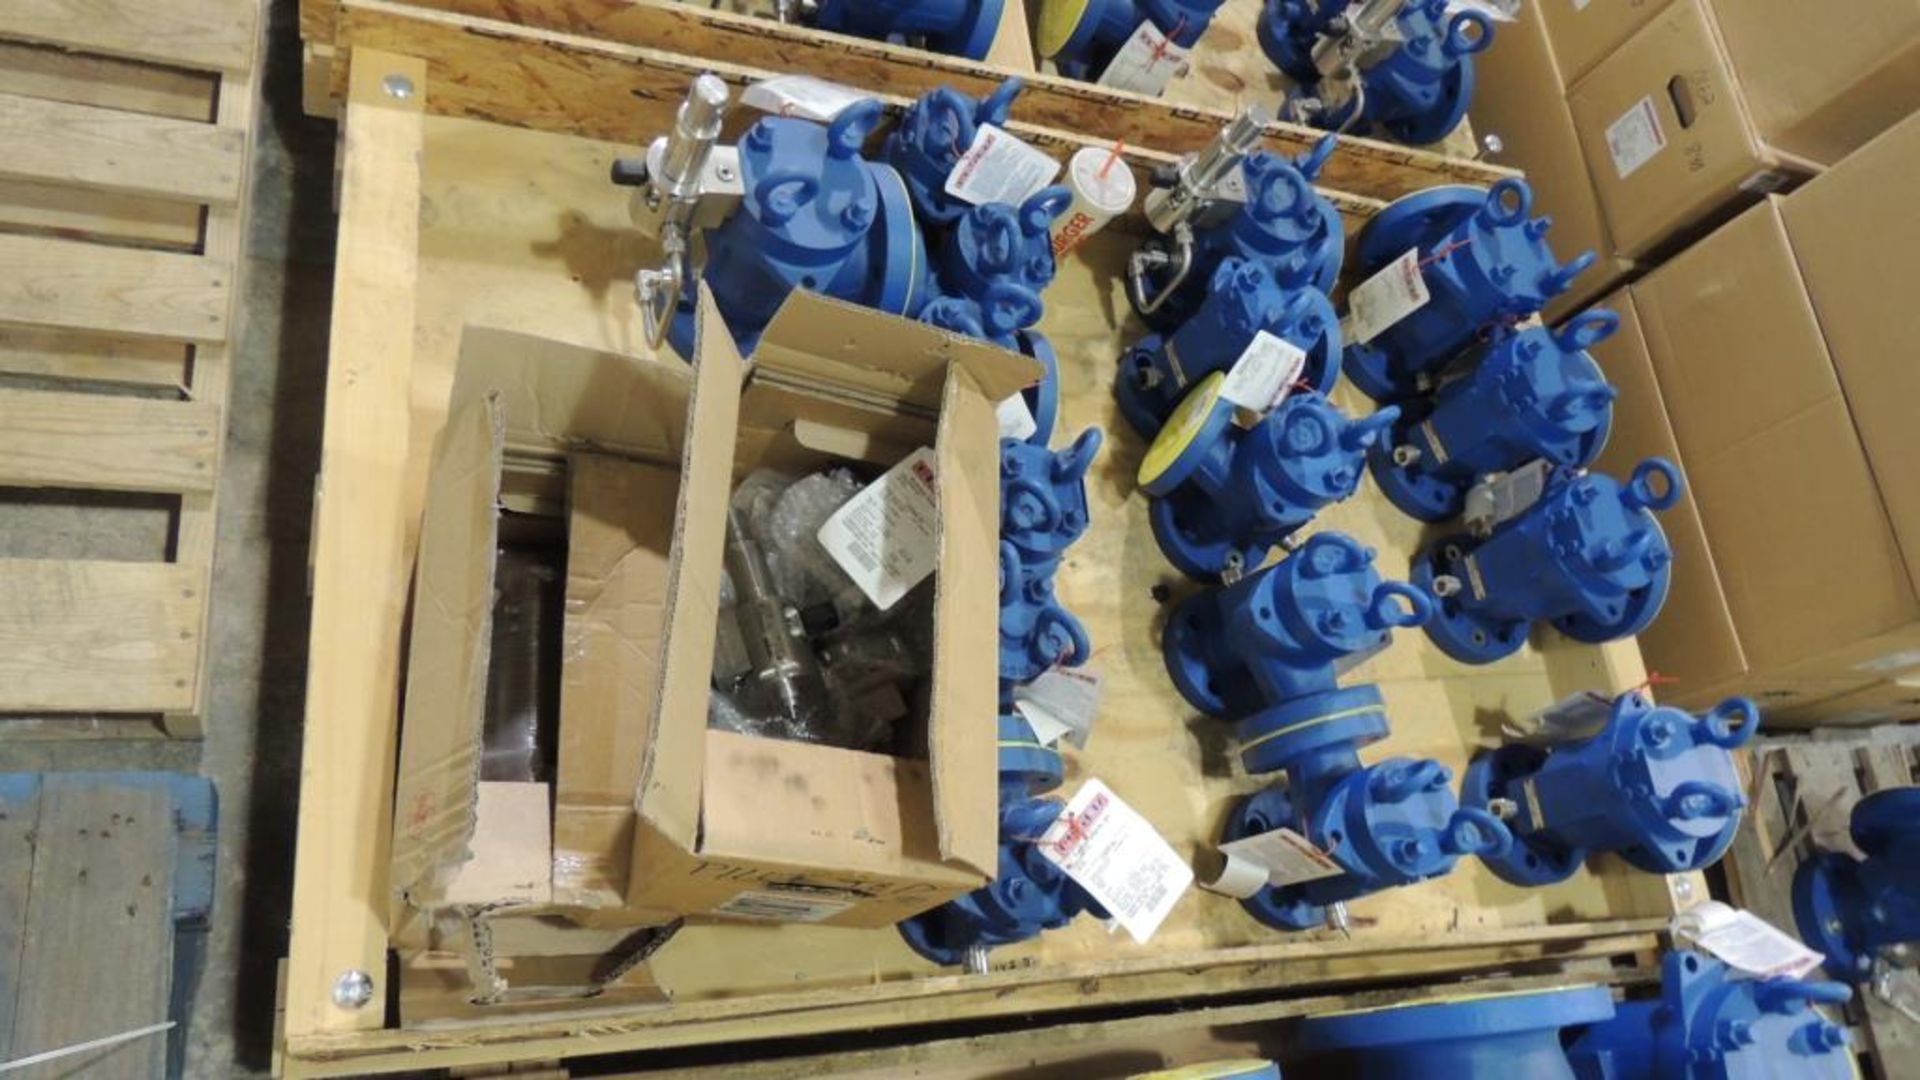 Large Quantity of Leser Relief and Safety Valves, plus Spare Parts Kits - Image 280 of 374